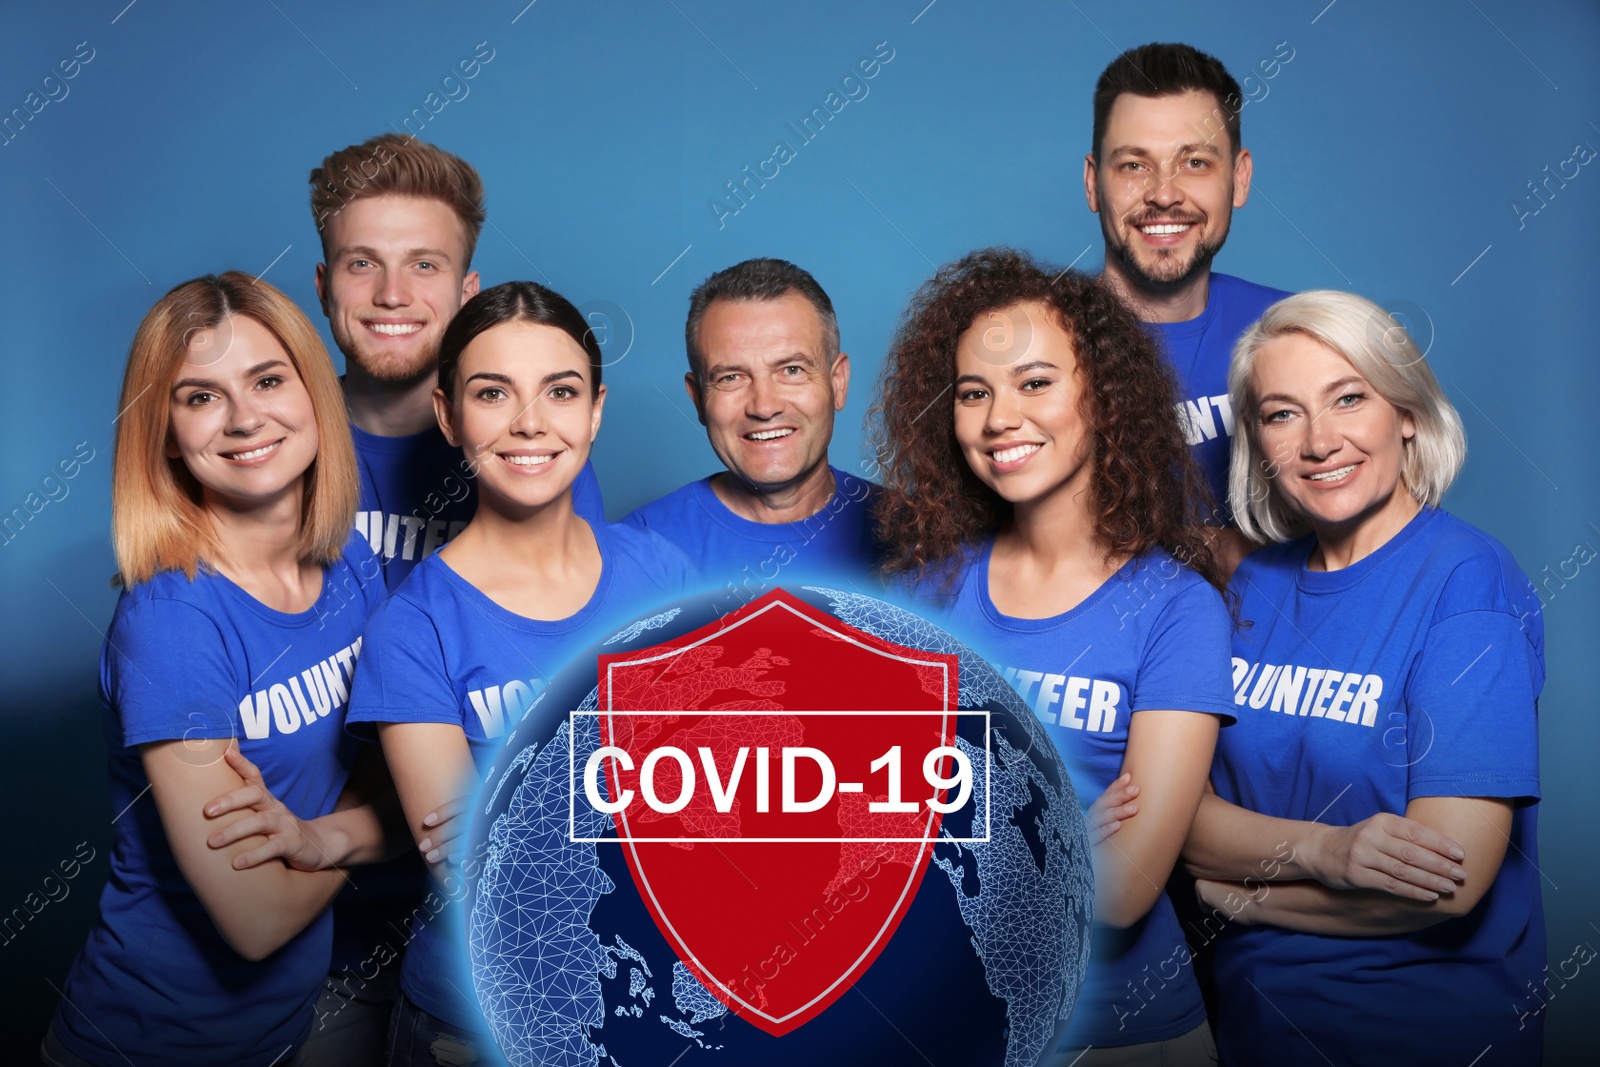 Image of Volunteers uniting to help during COVID-19 outbreak. Group of people on blue background, world globe and shield illustrations